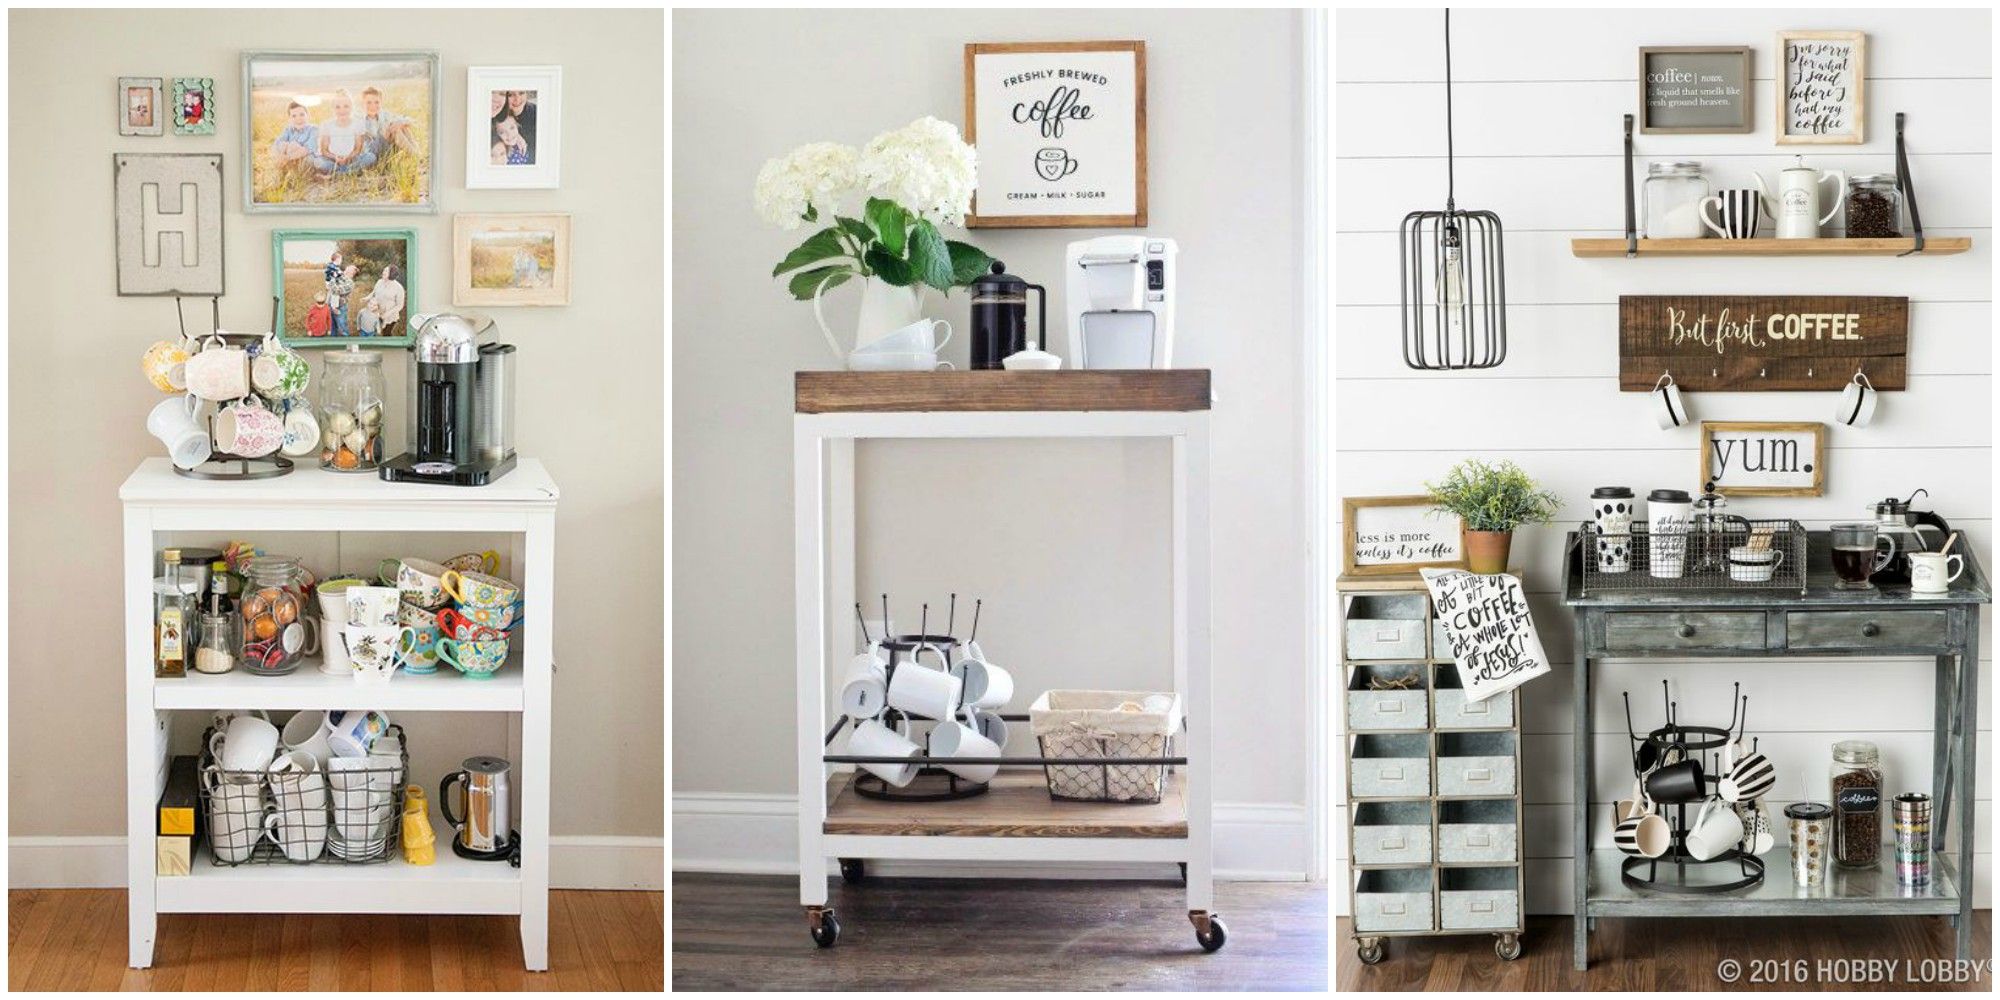 https://hips.hearstapps.com/countryliving/assets/17/18/1493670193-coffee-carts-diy-trend-inspiration.jpg